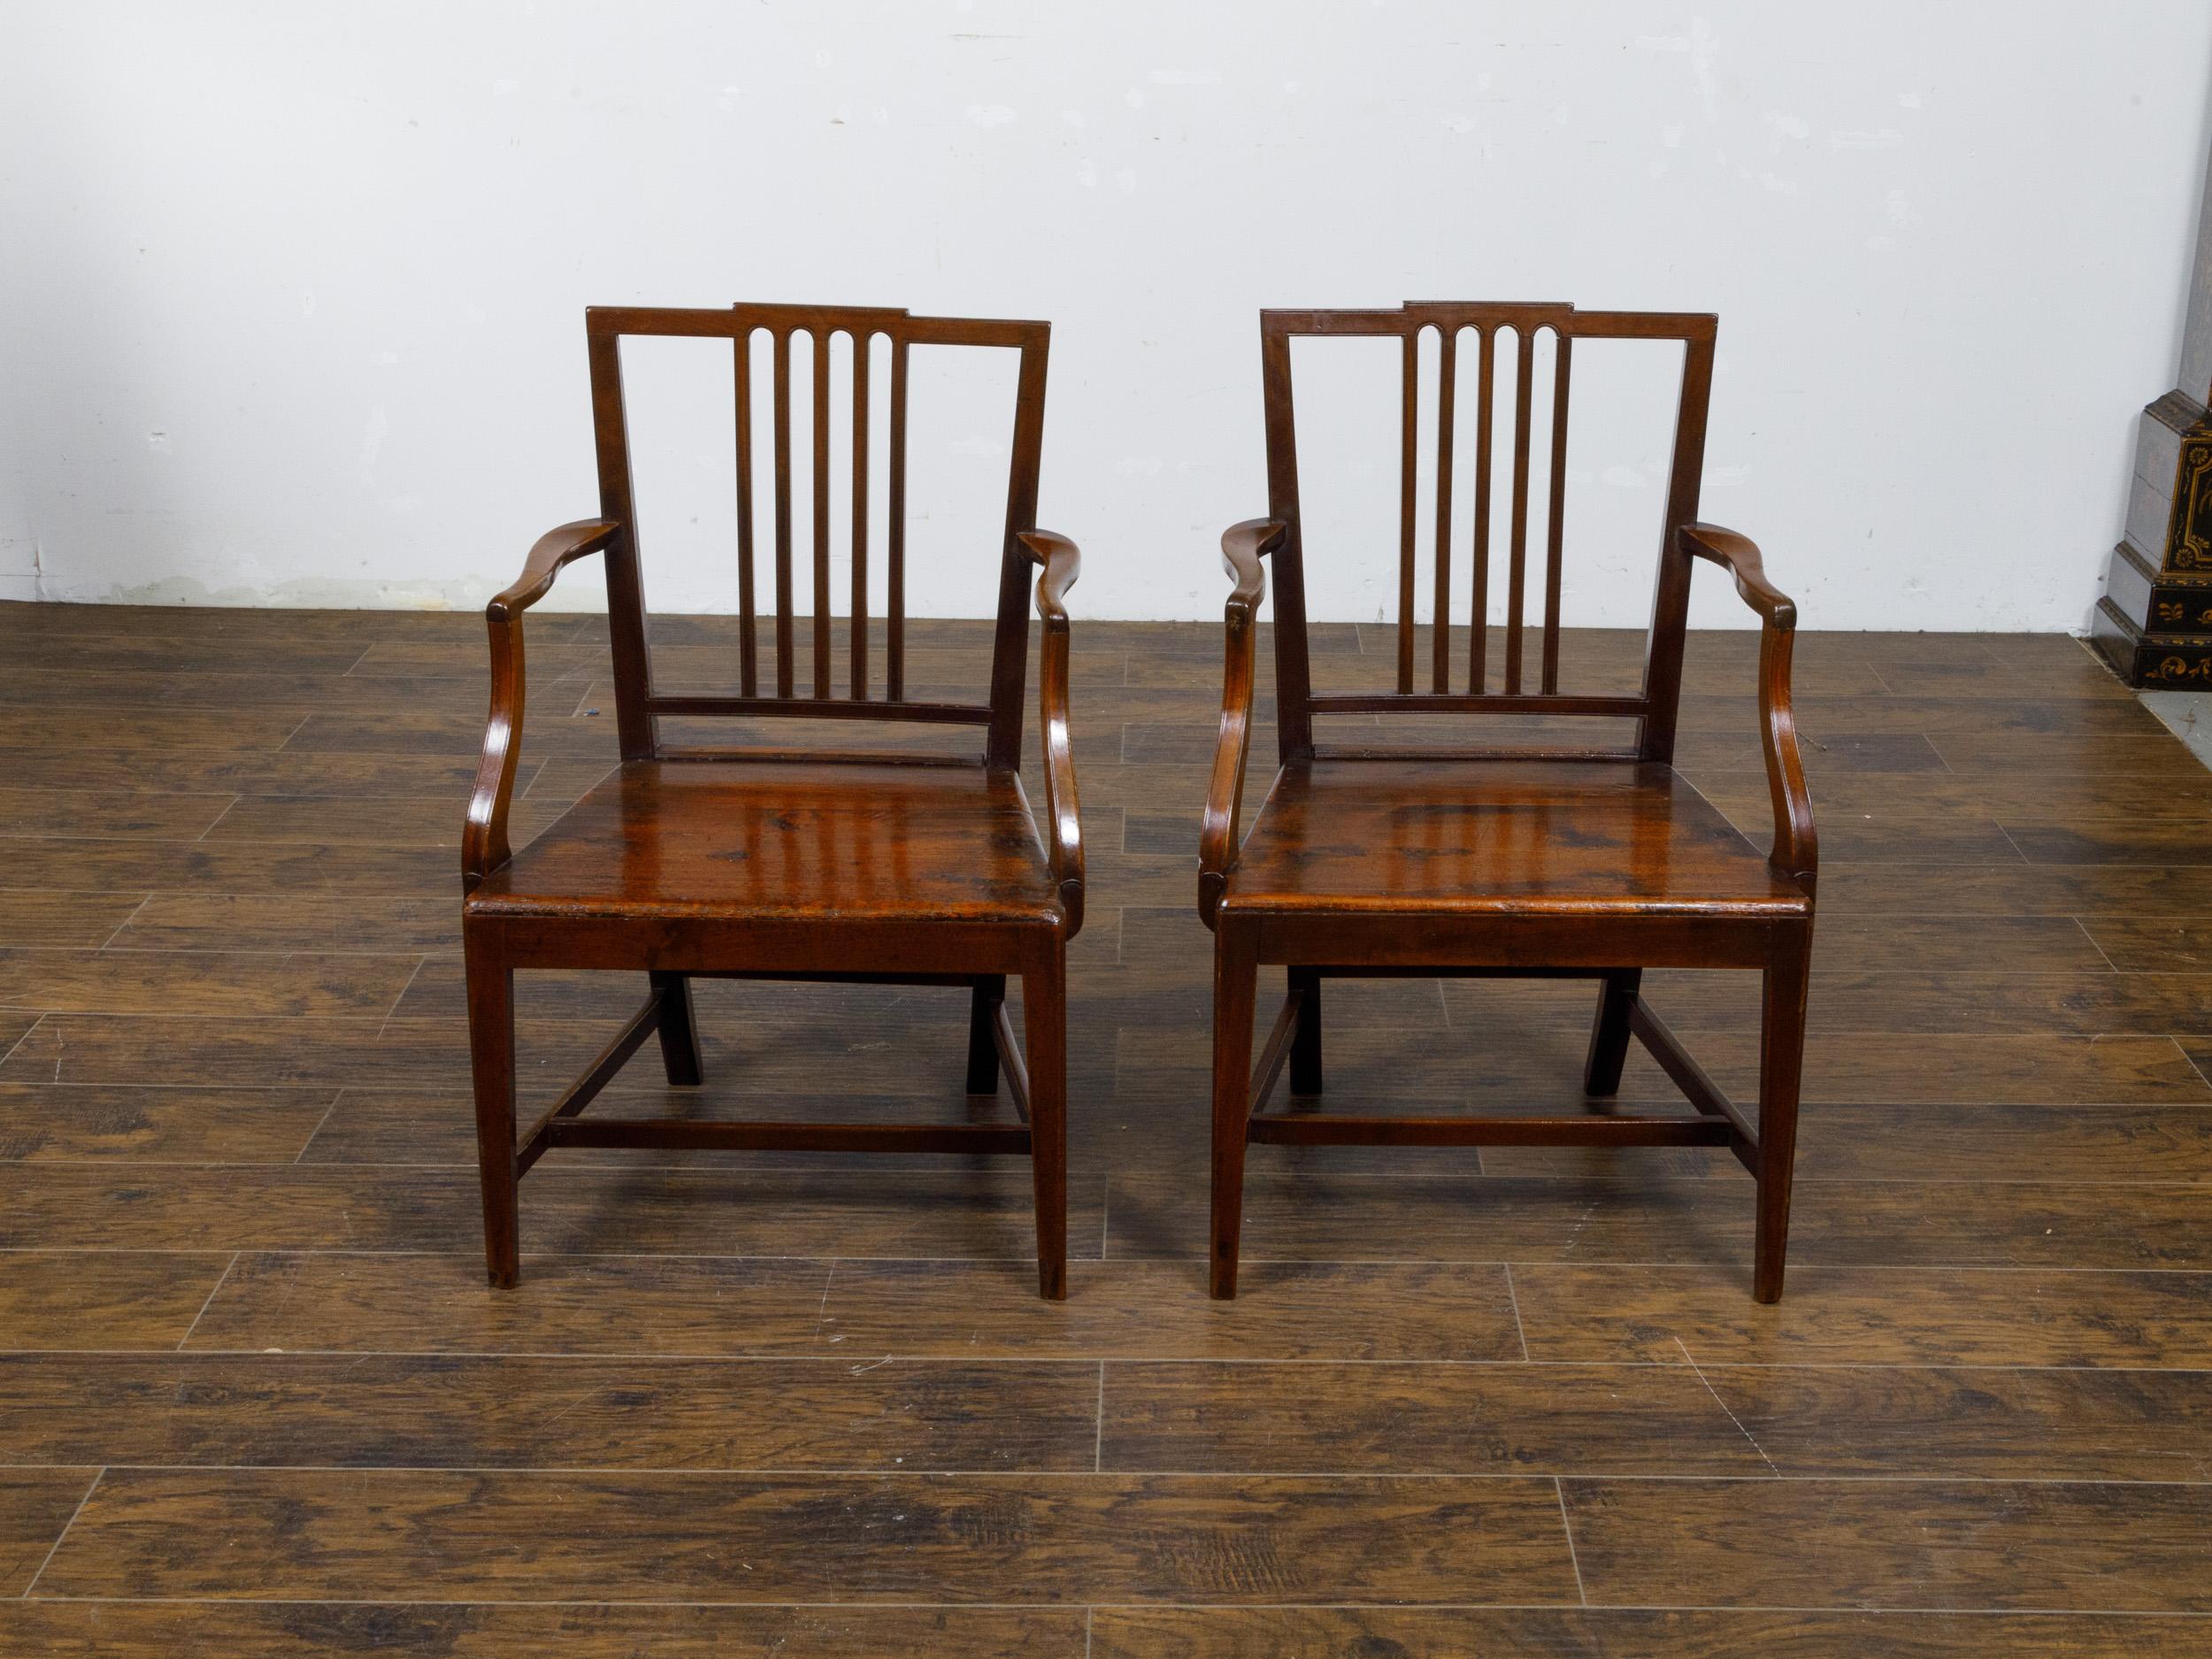 Pair of English Early 19th Century Plank Seat Chairs with Scrolling Arms For Sale 6